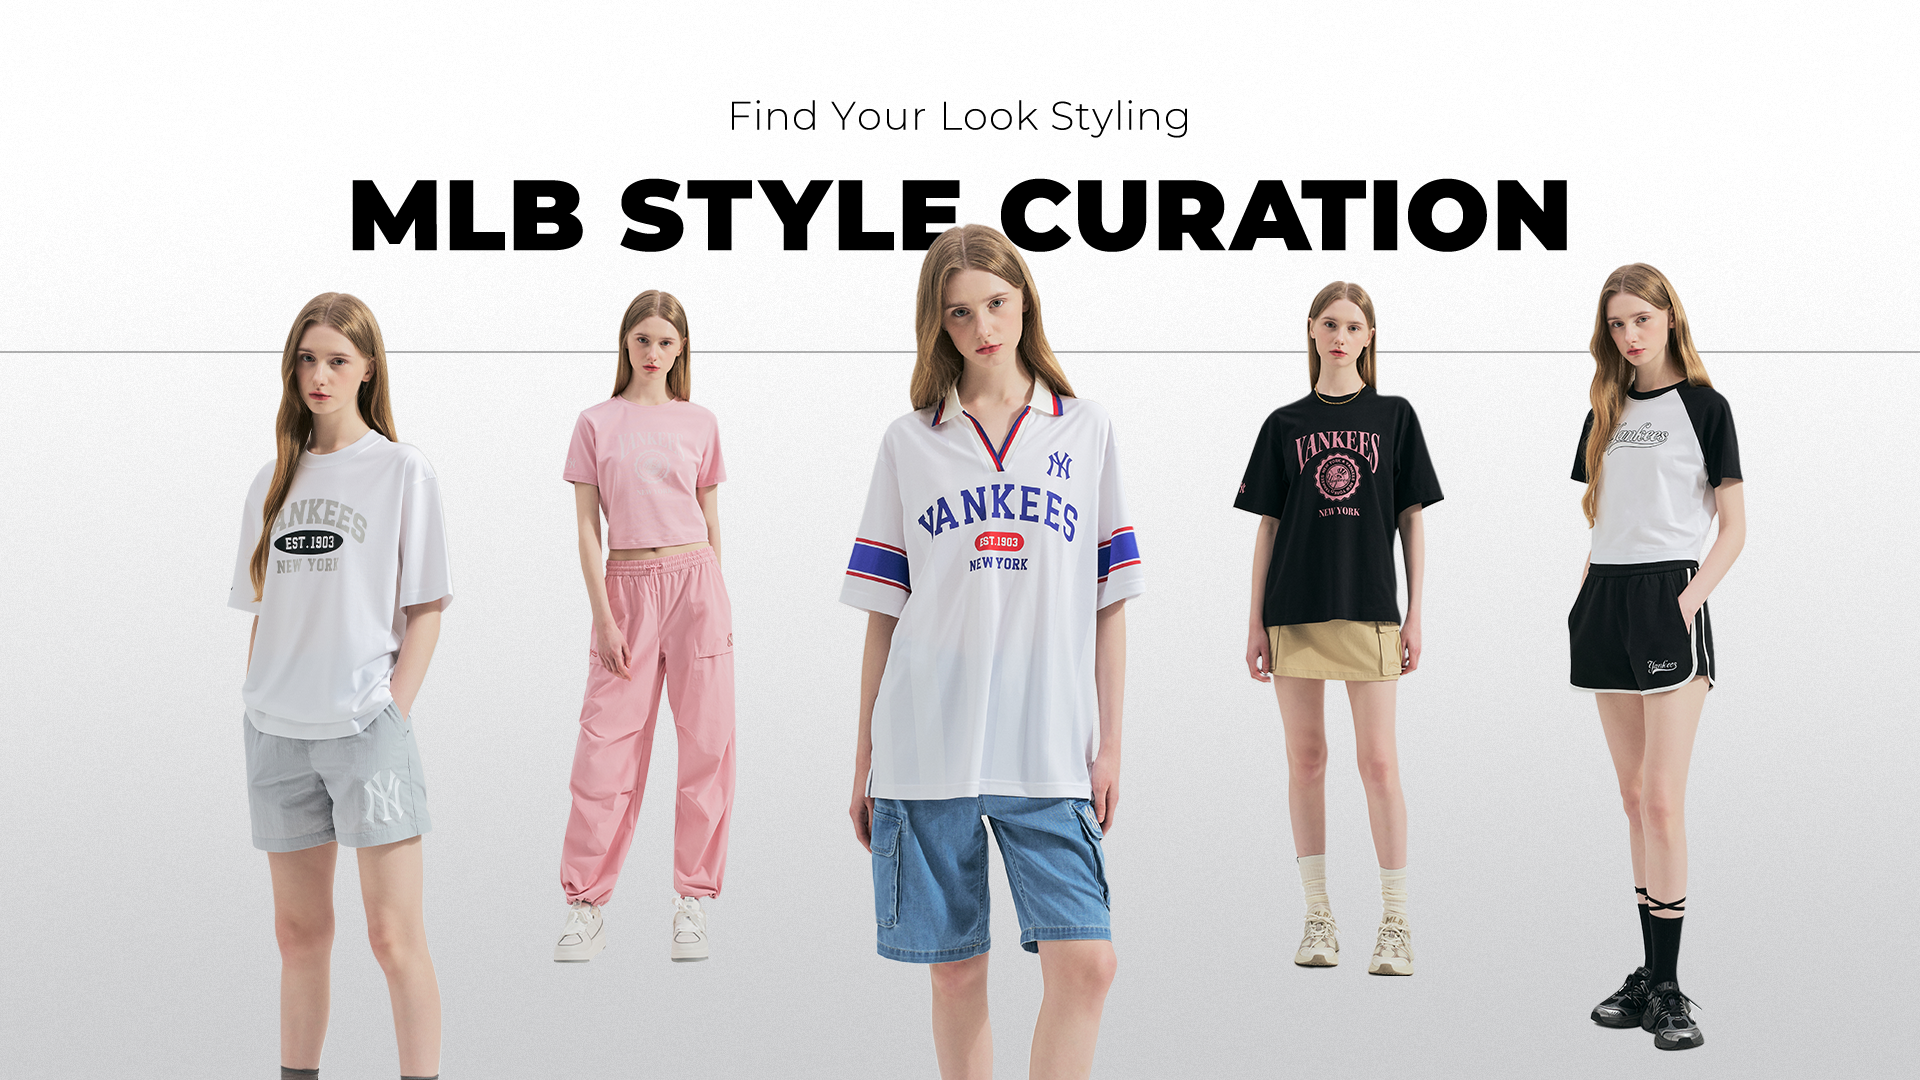 MLB STYLE CURATION Find Your Look Styling